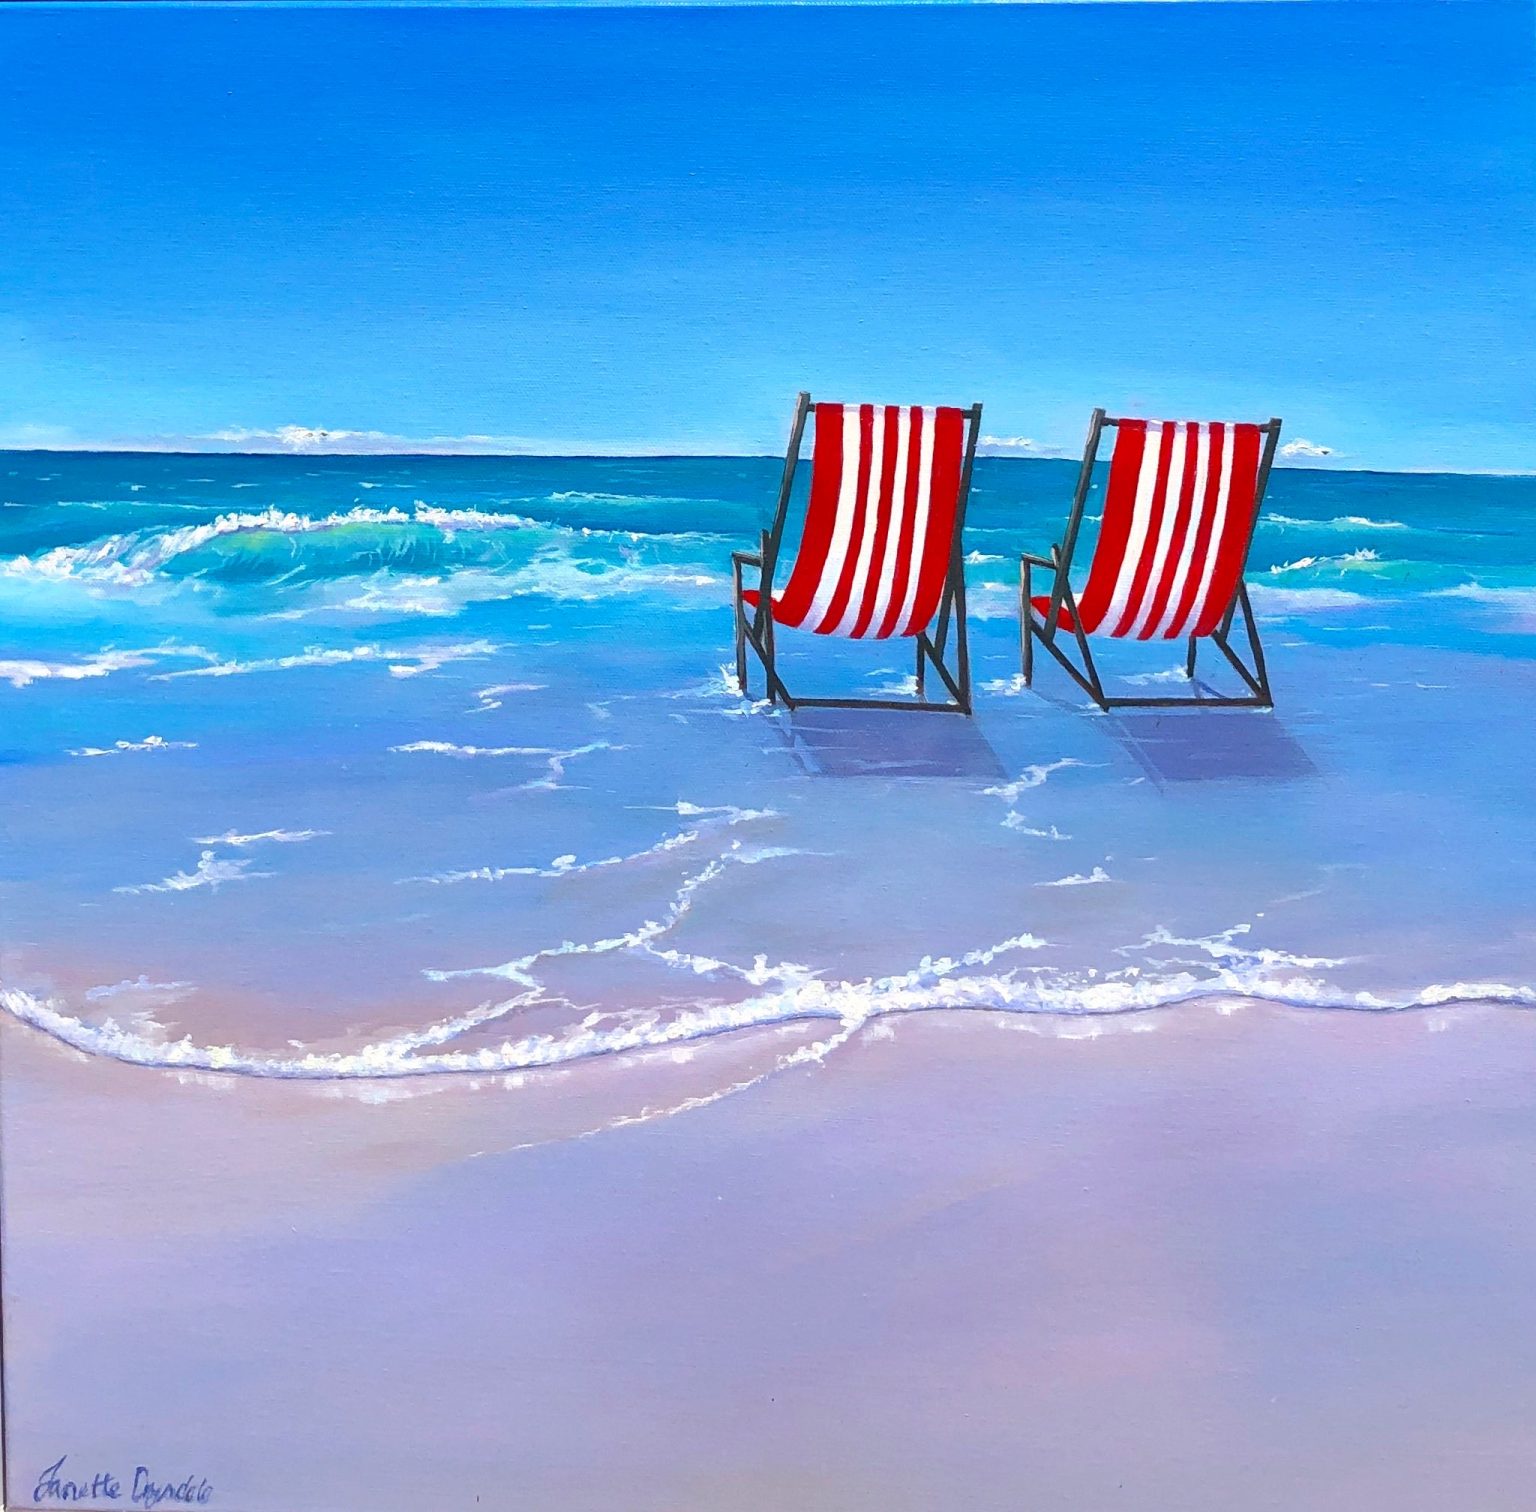 Janette Drysdales' "Take A Seat" oil painting product